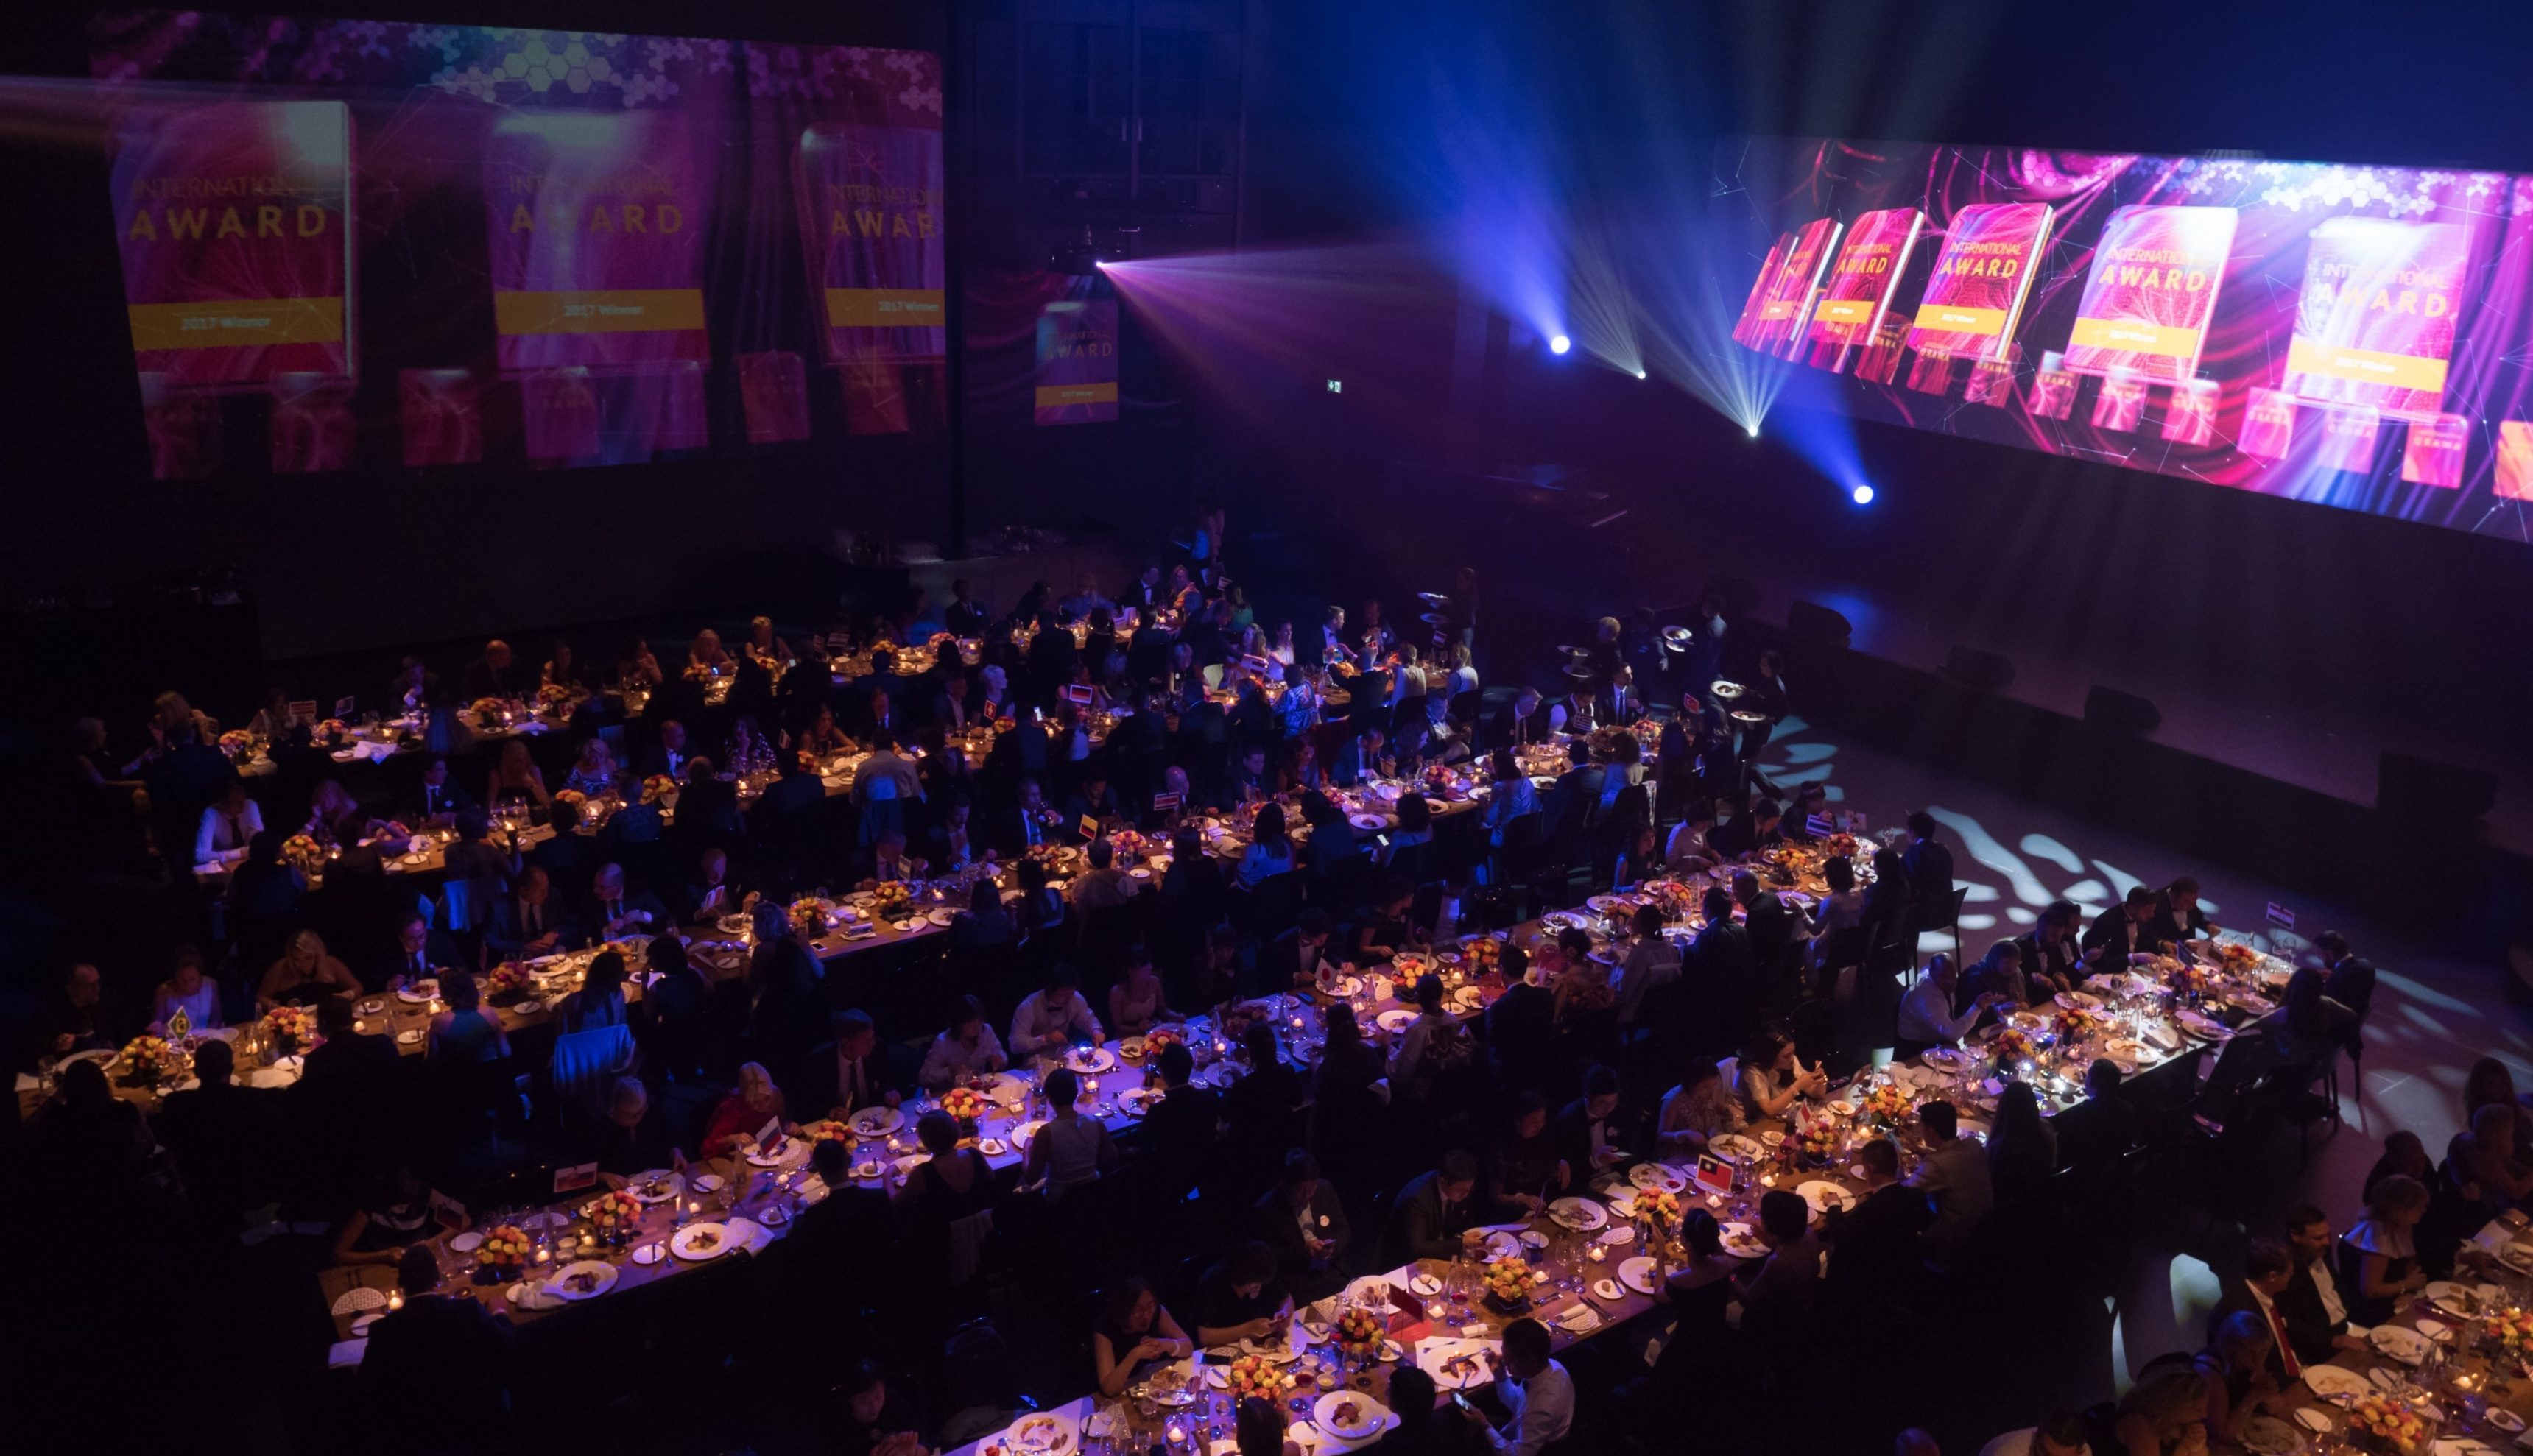 EGG events - Agency - Case story : CEO field award diner